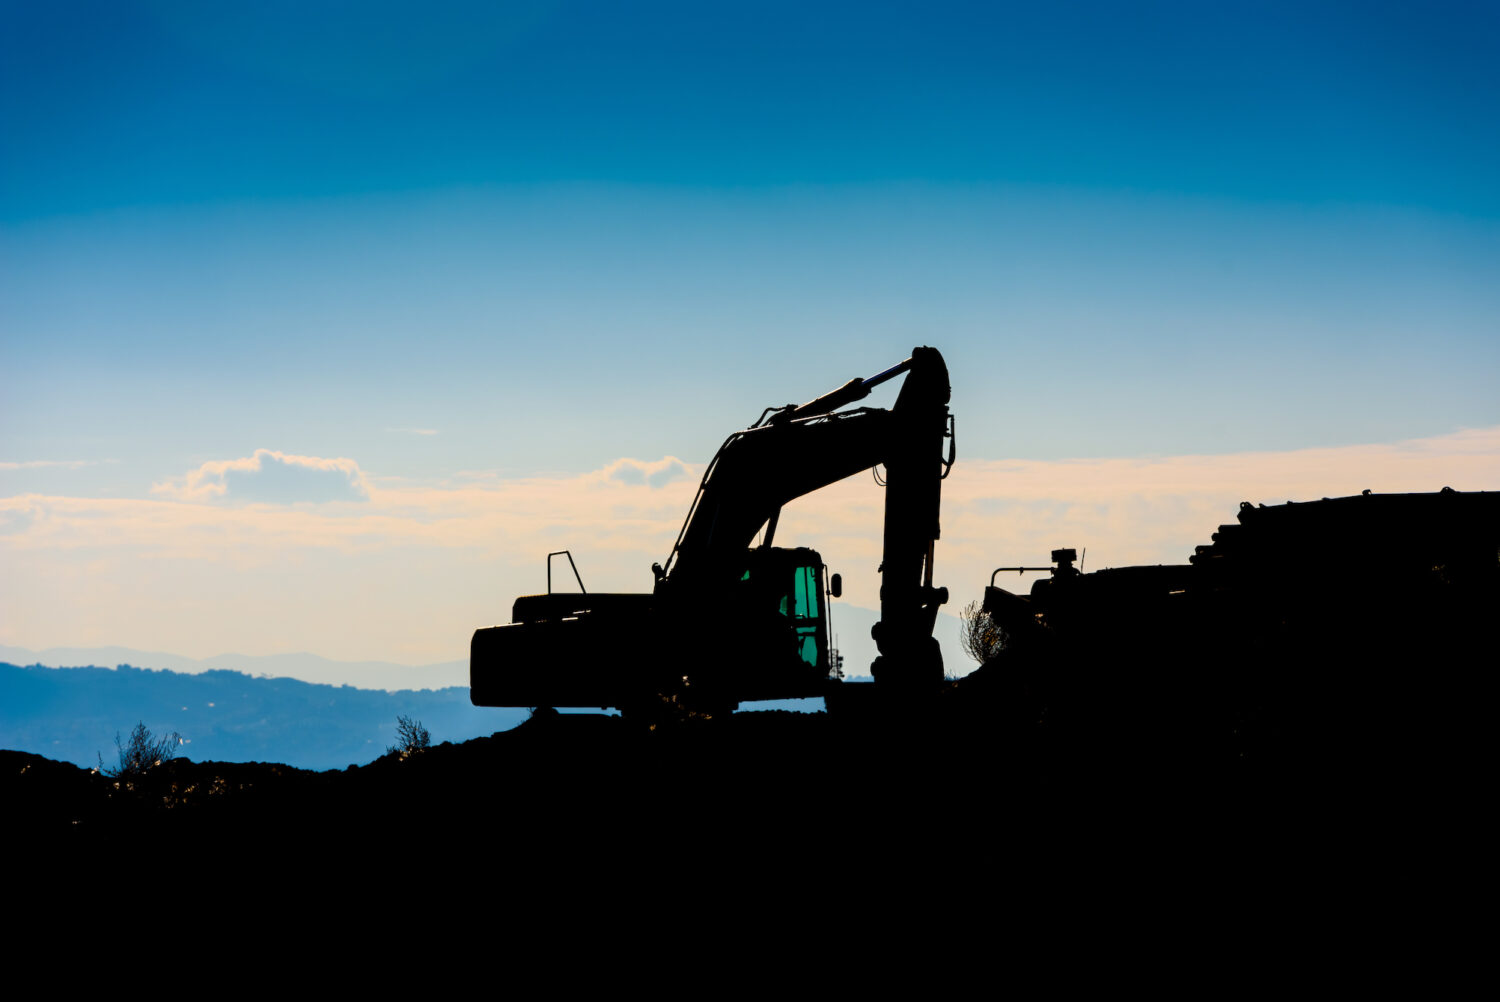 Backlit silhouette of an excavator on top of a hill with unfocused sky background